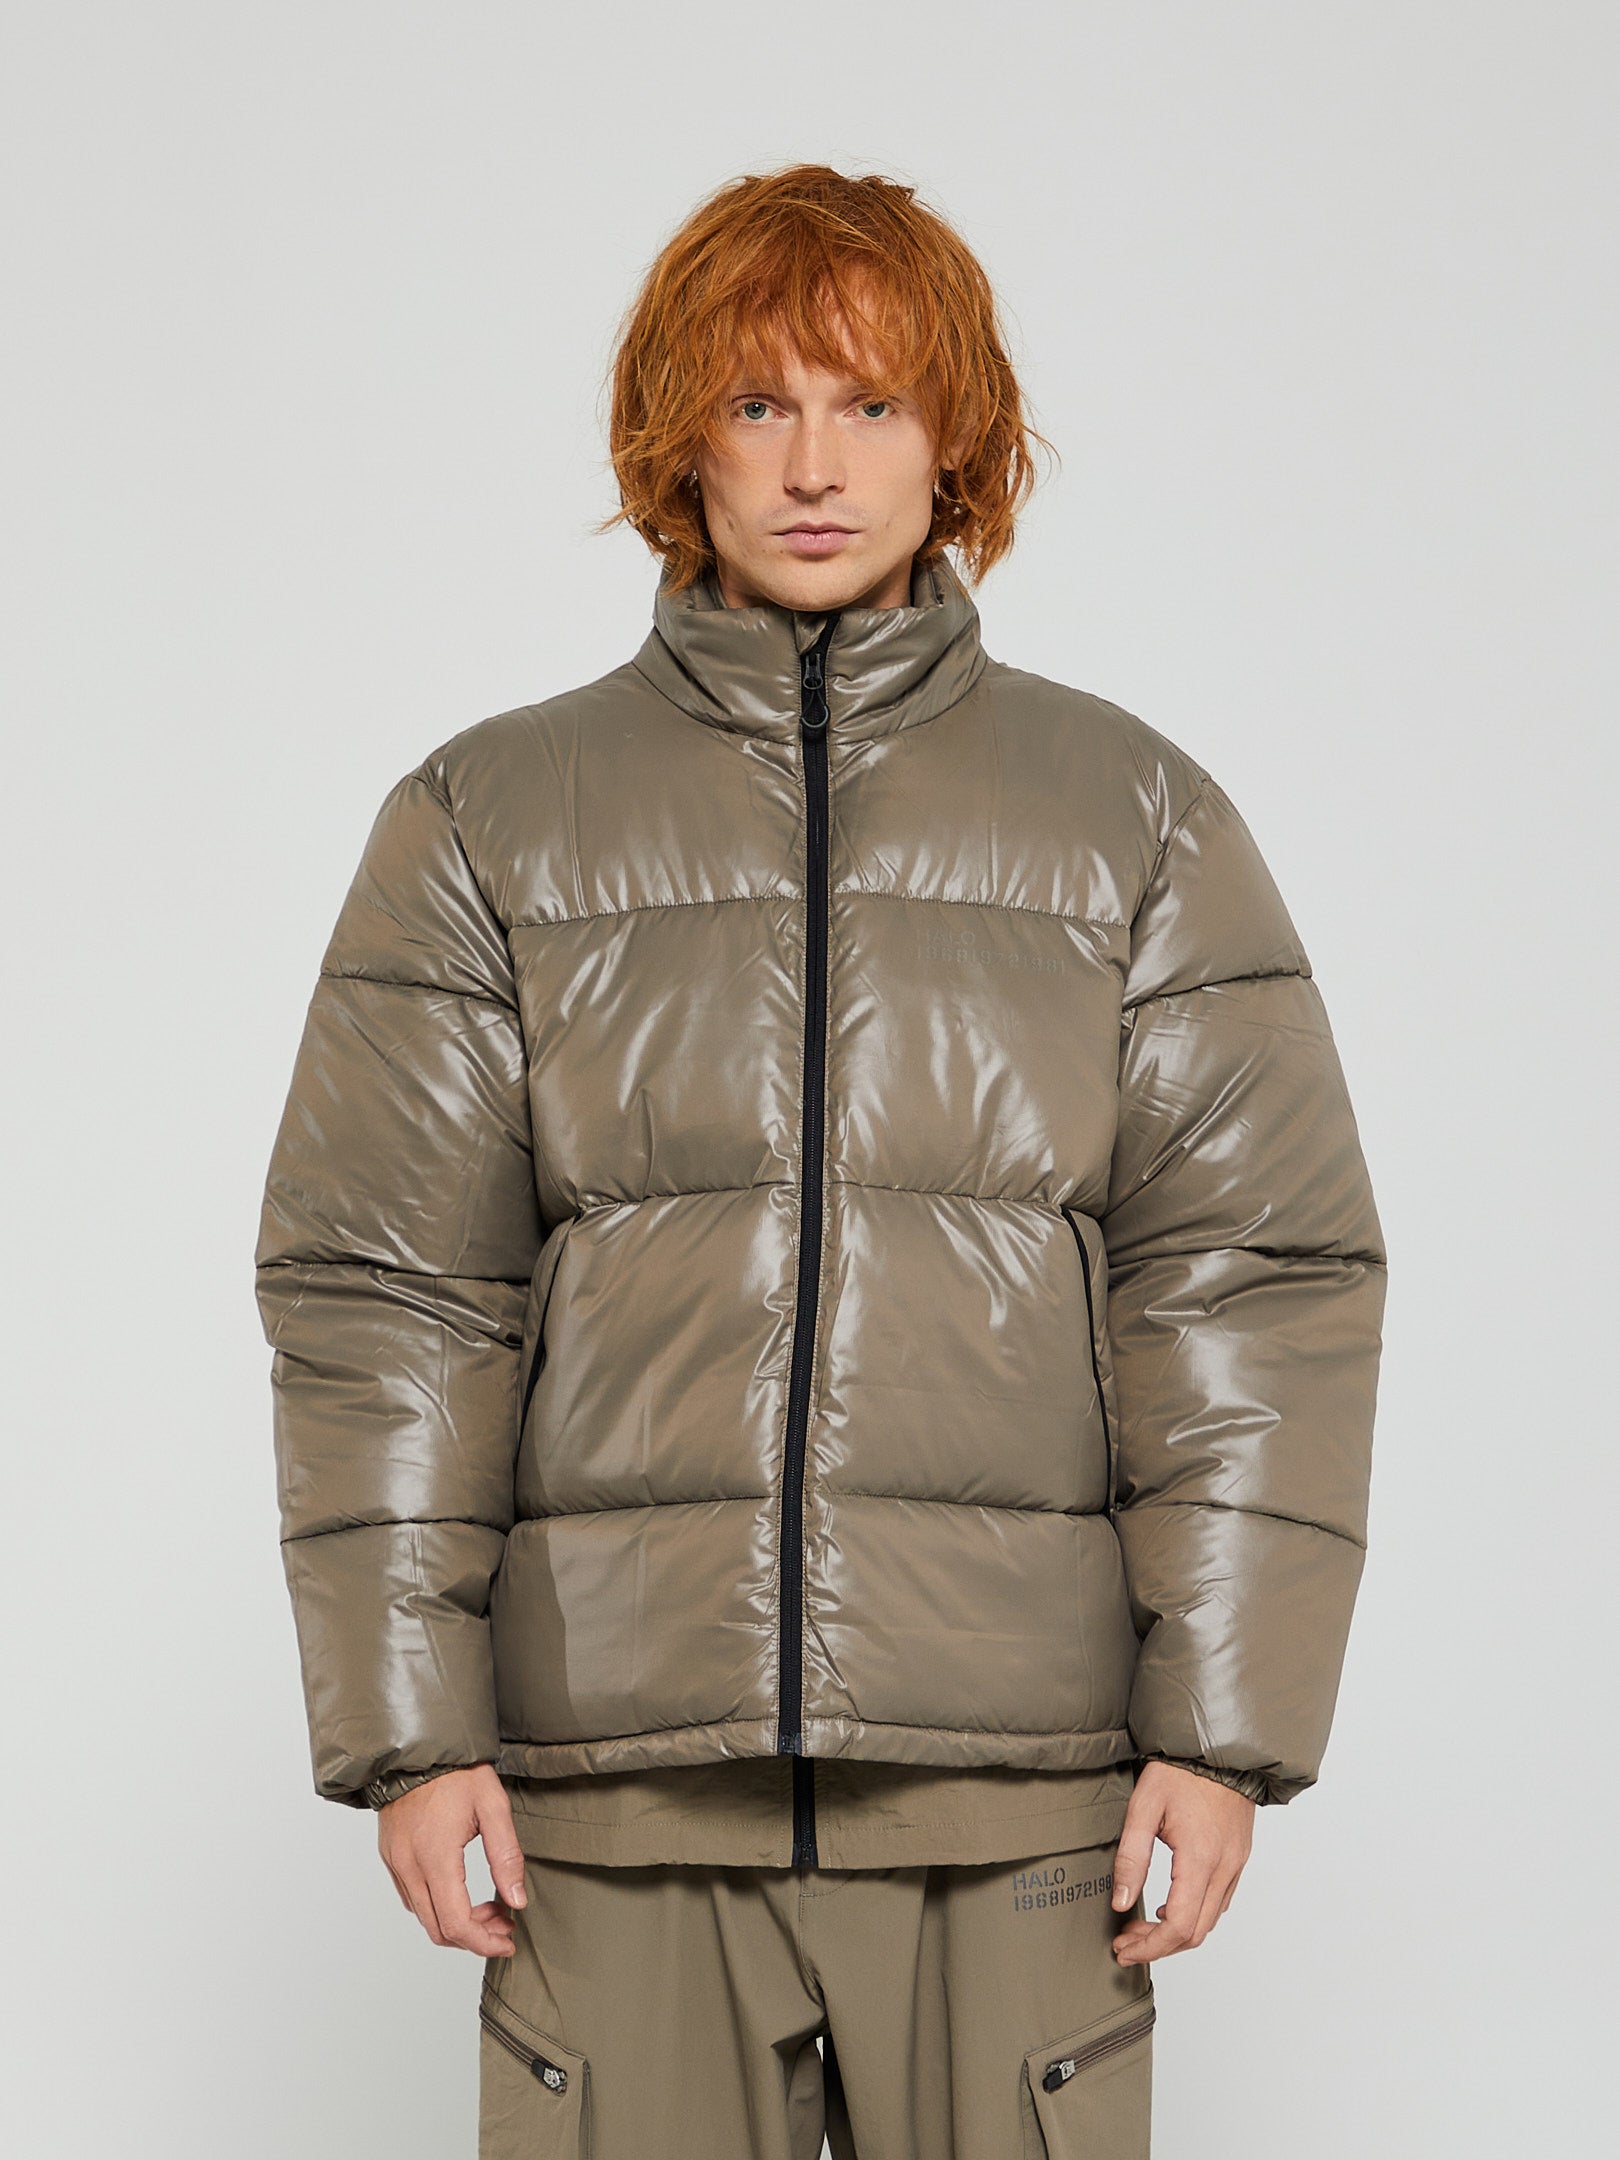 HALO - Boxy Thermolite Puffer Jacket in Morel